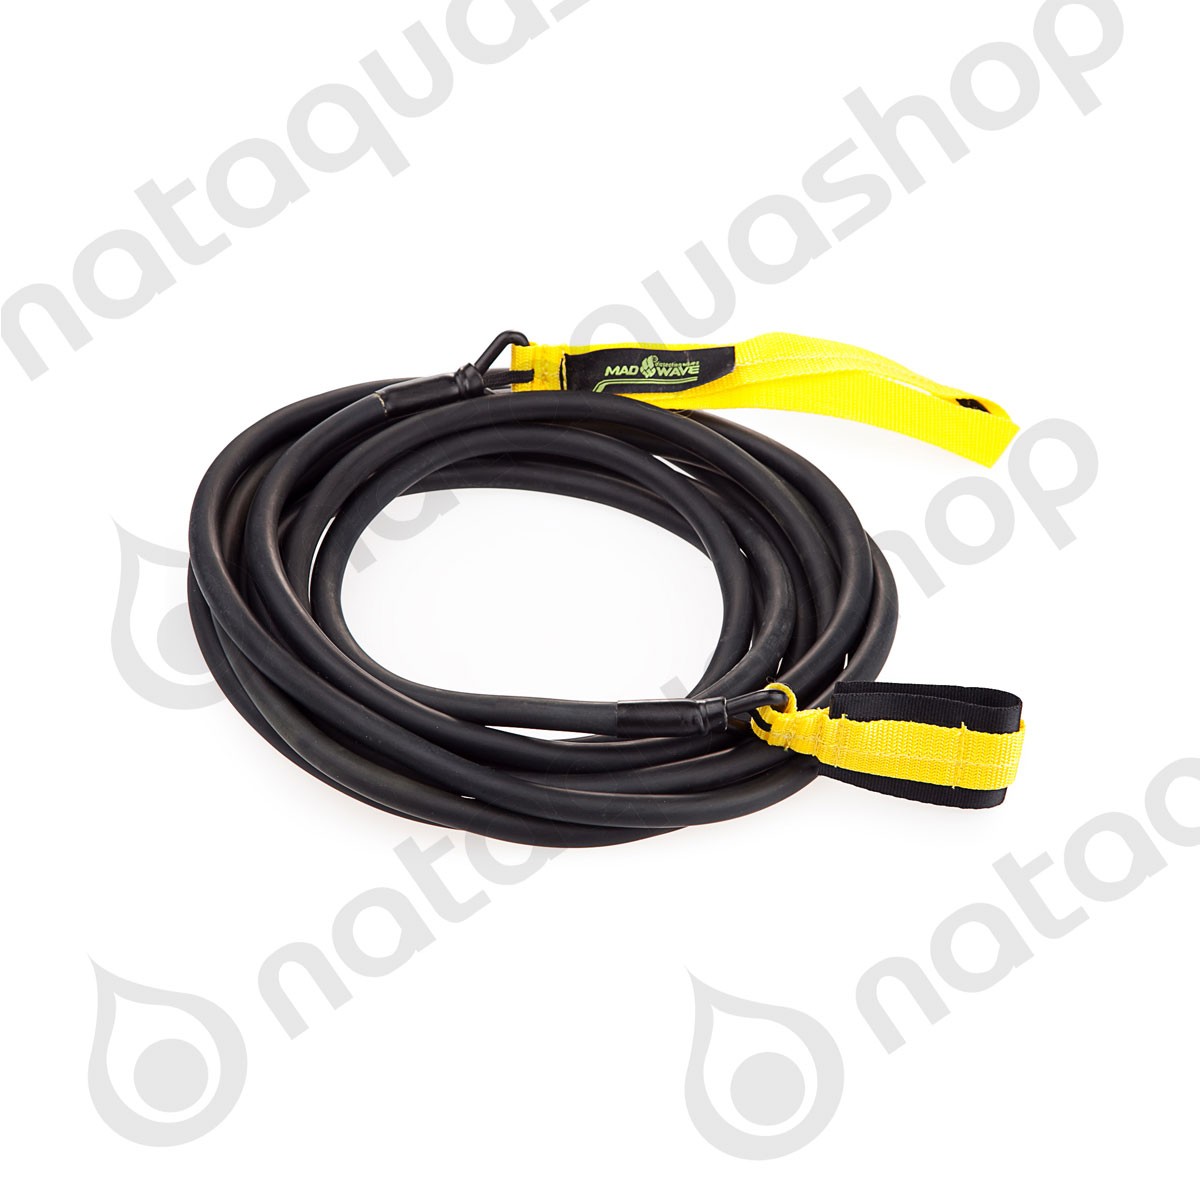 LONG SAFETY CORD Color